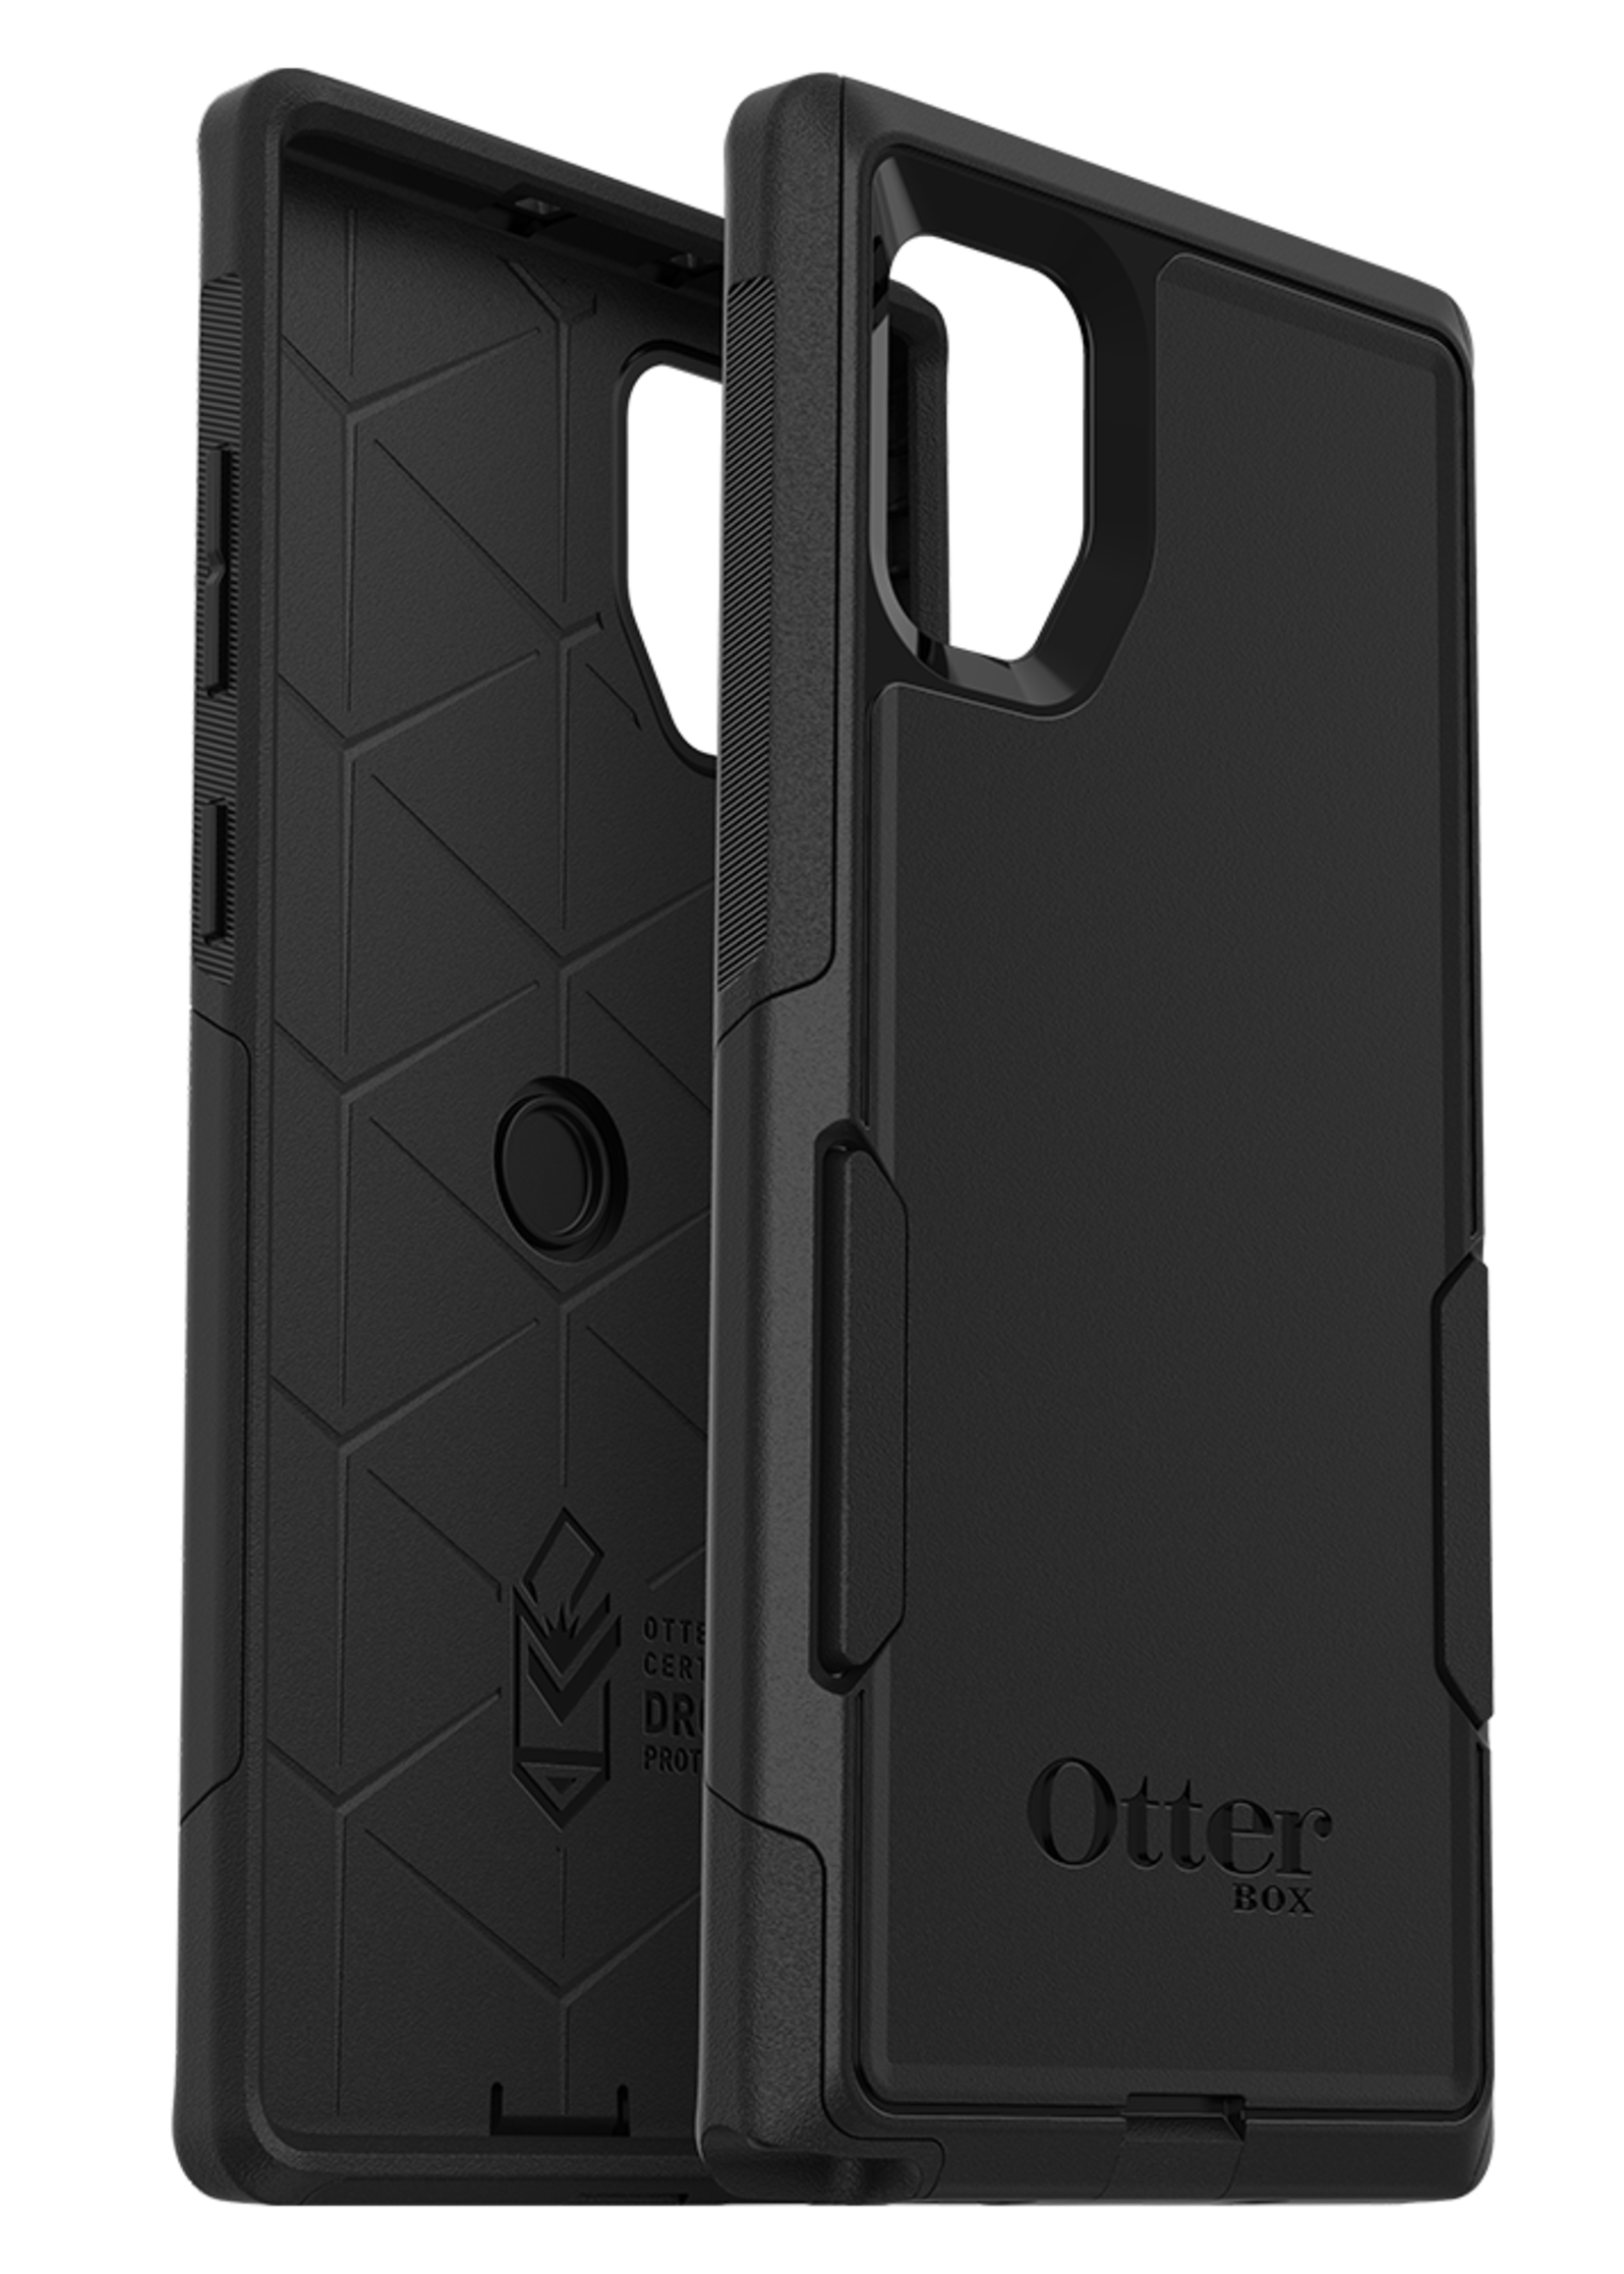 Otterbox OtterBox - Commuter Case for Samsung Galaxy Note10 Plus - Black